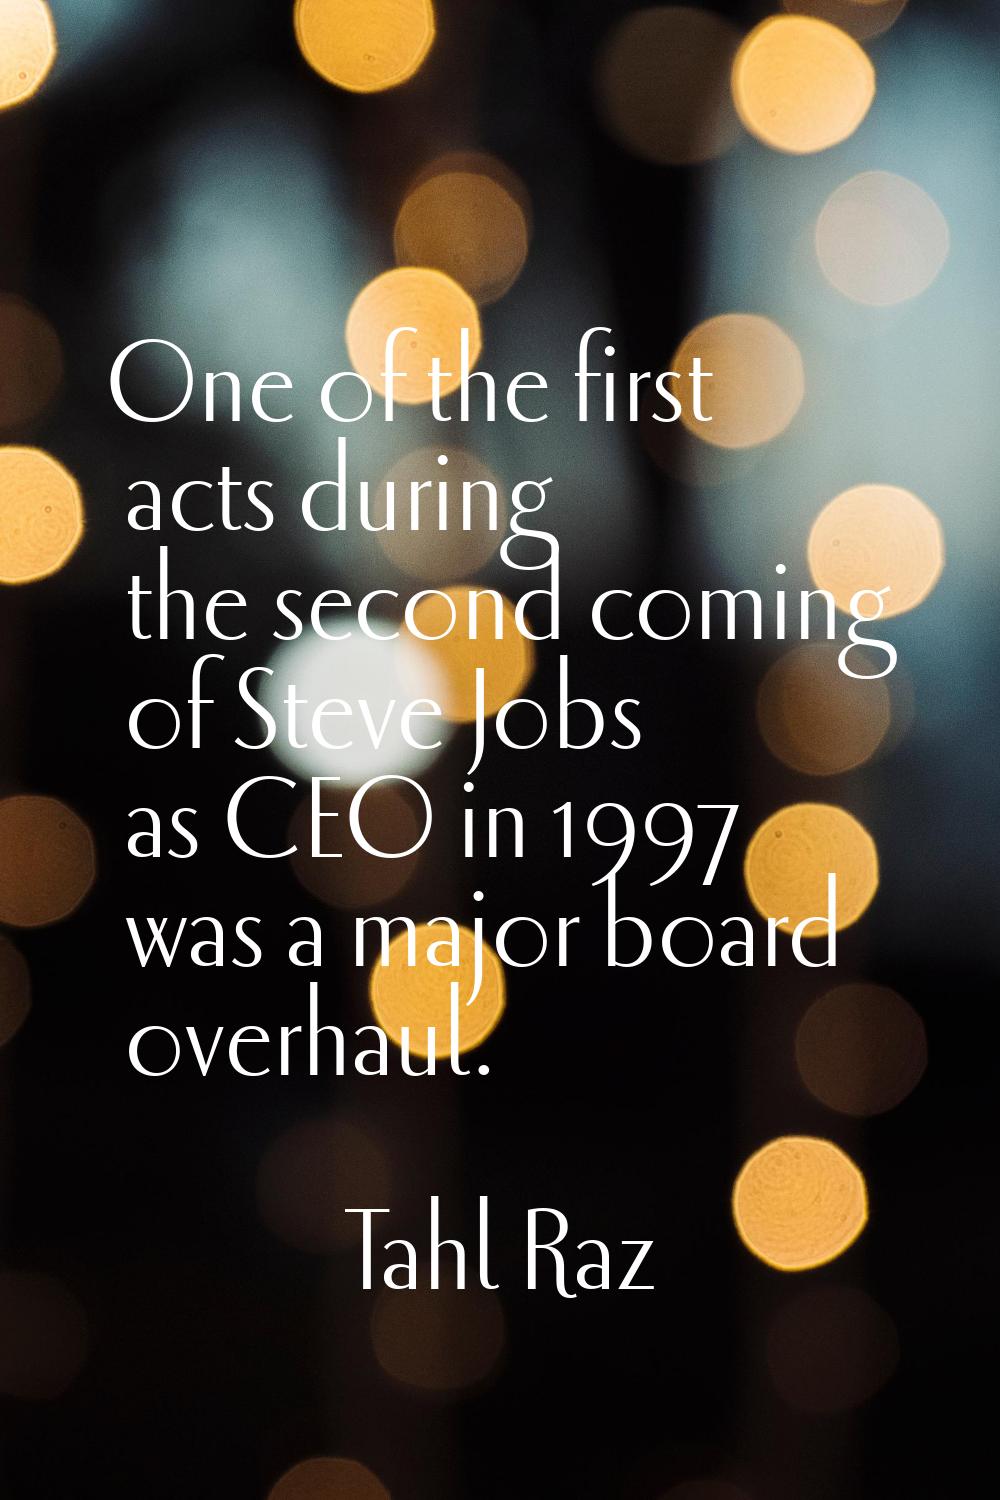 One of the first acts during the second coming of Steve Jobs as CEO in 1997 was a major board overh